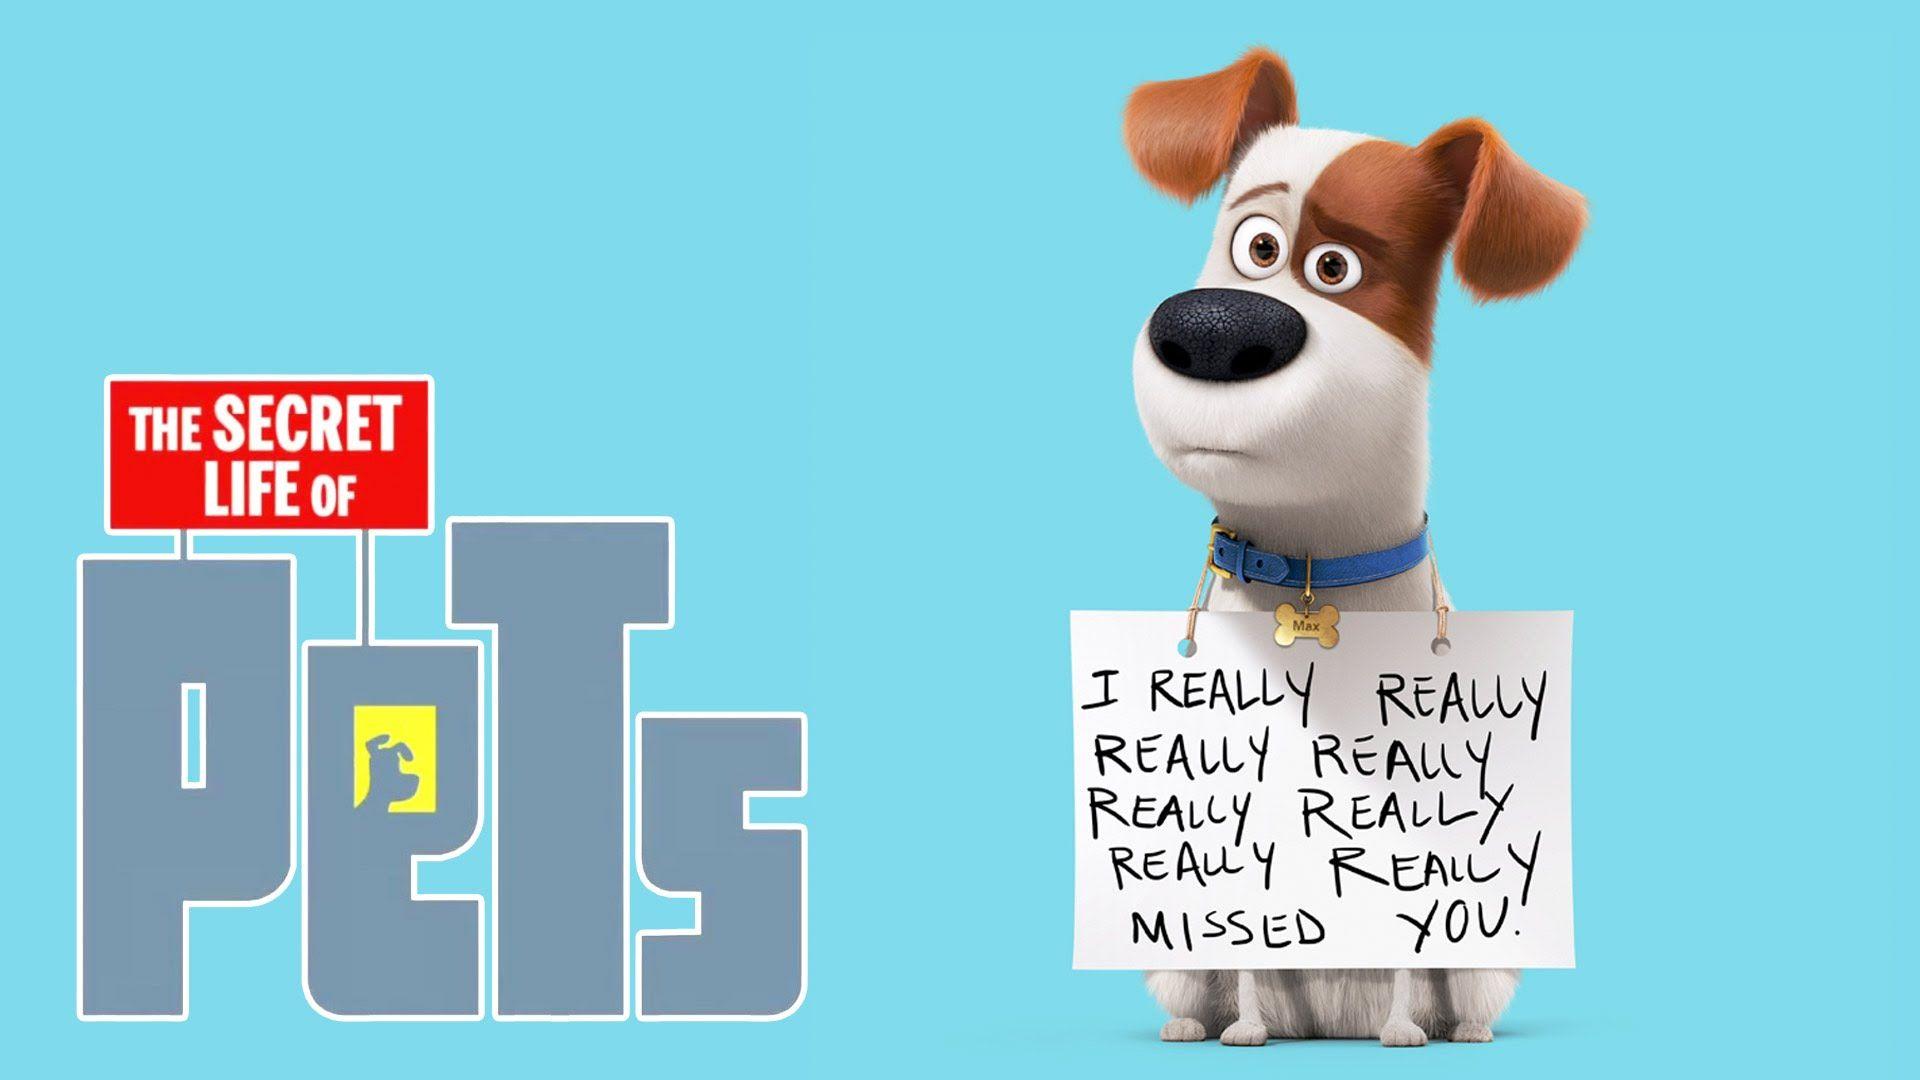 The Secret Life of Pets: a comedy about the lives our pets lead